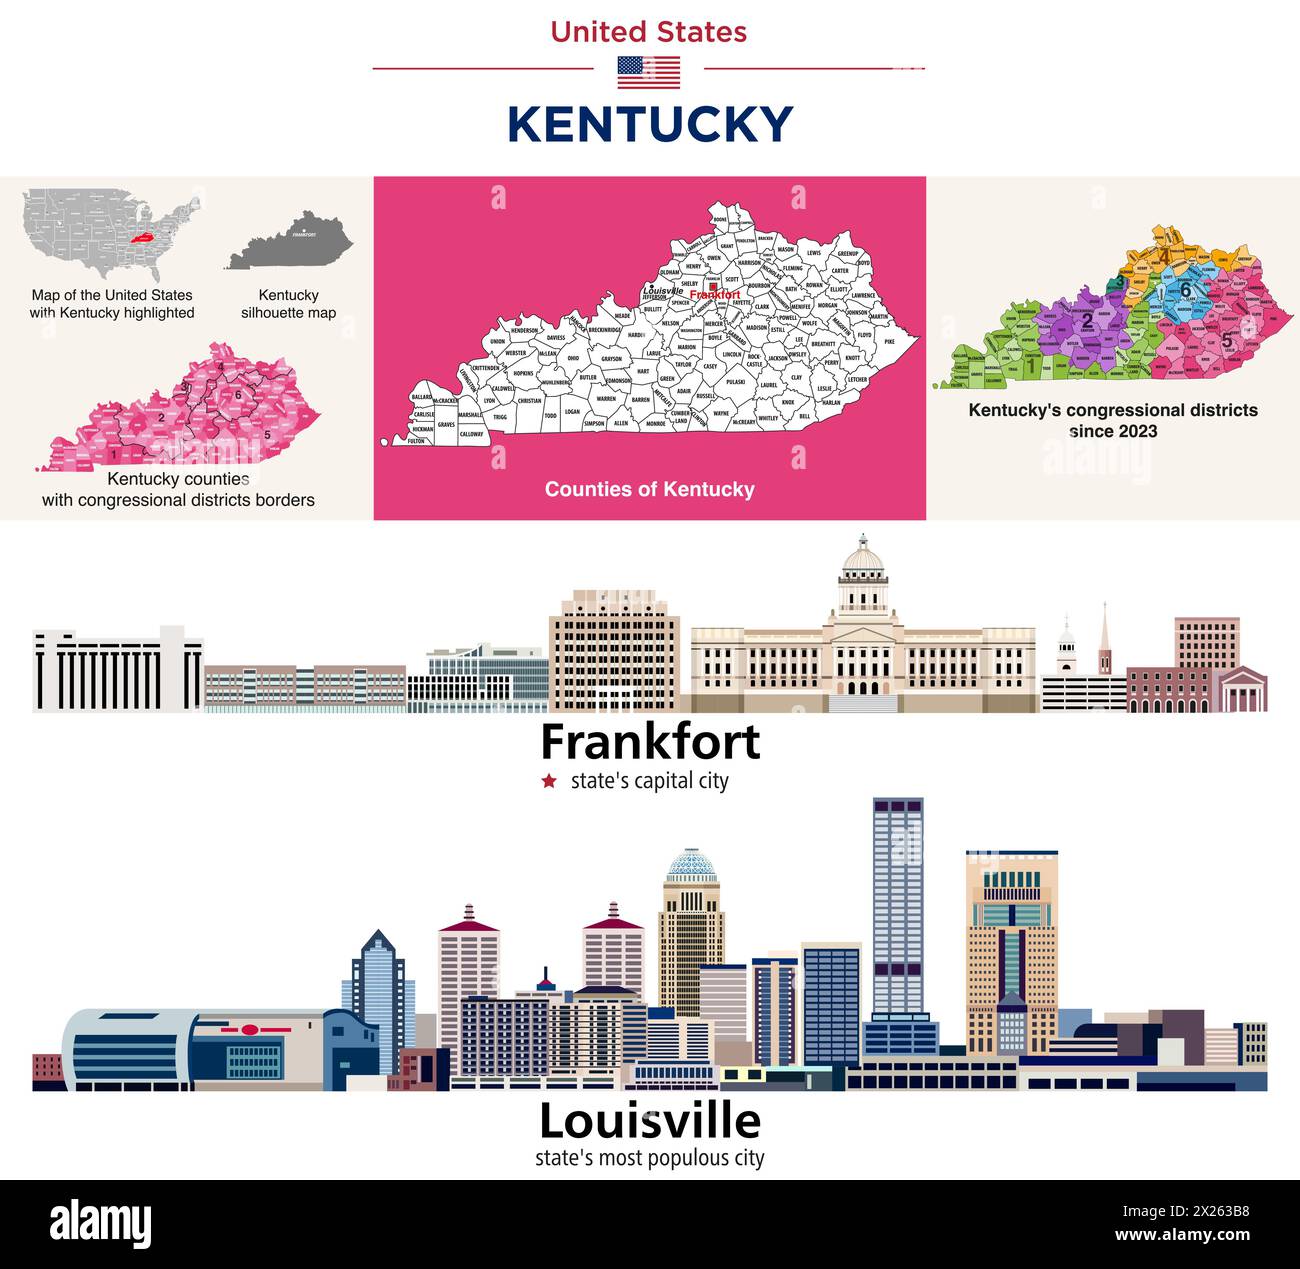 Kentucky's counties map and congressional districts since 2023 map. Frankfort (state's capital city) and Louisville (state's most populous city) skyli Stock Vector